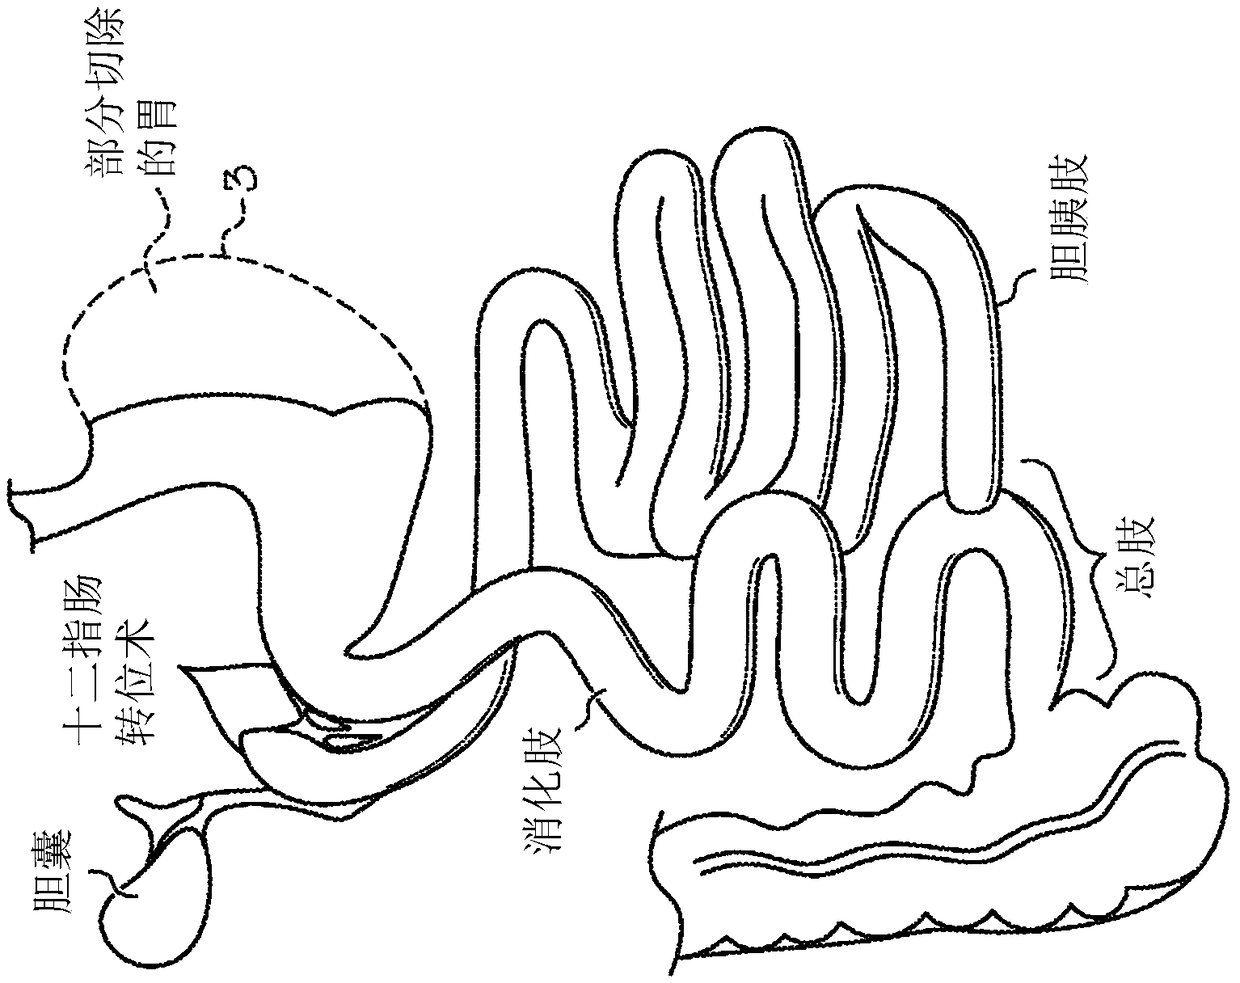 Medical device and method for preventing bile reflux following bariatric surgery